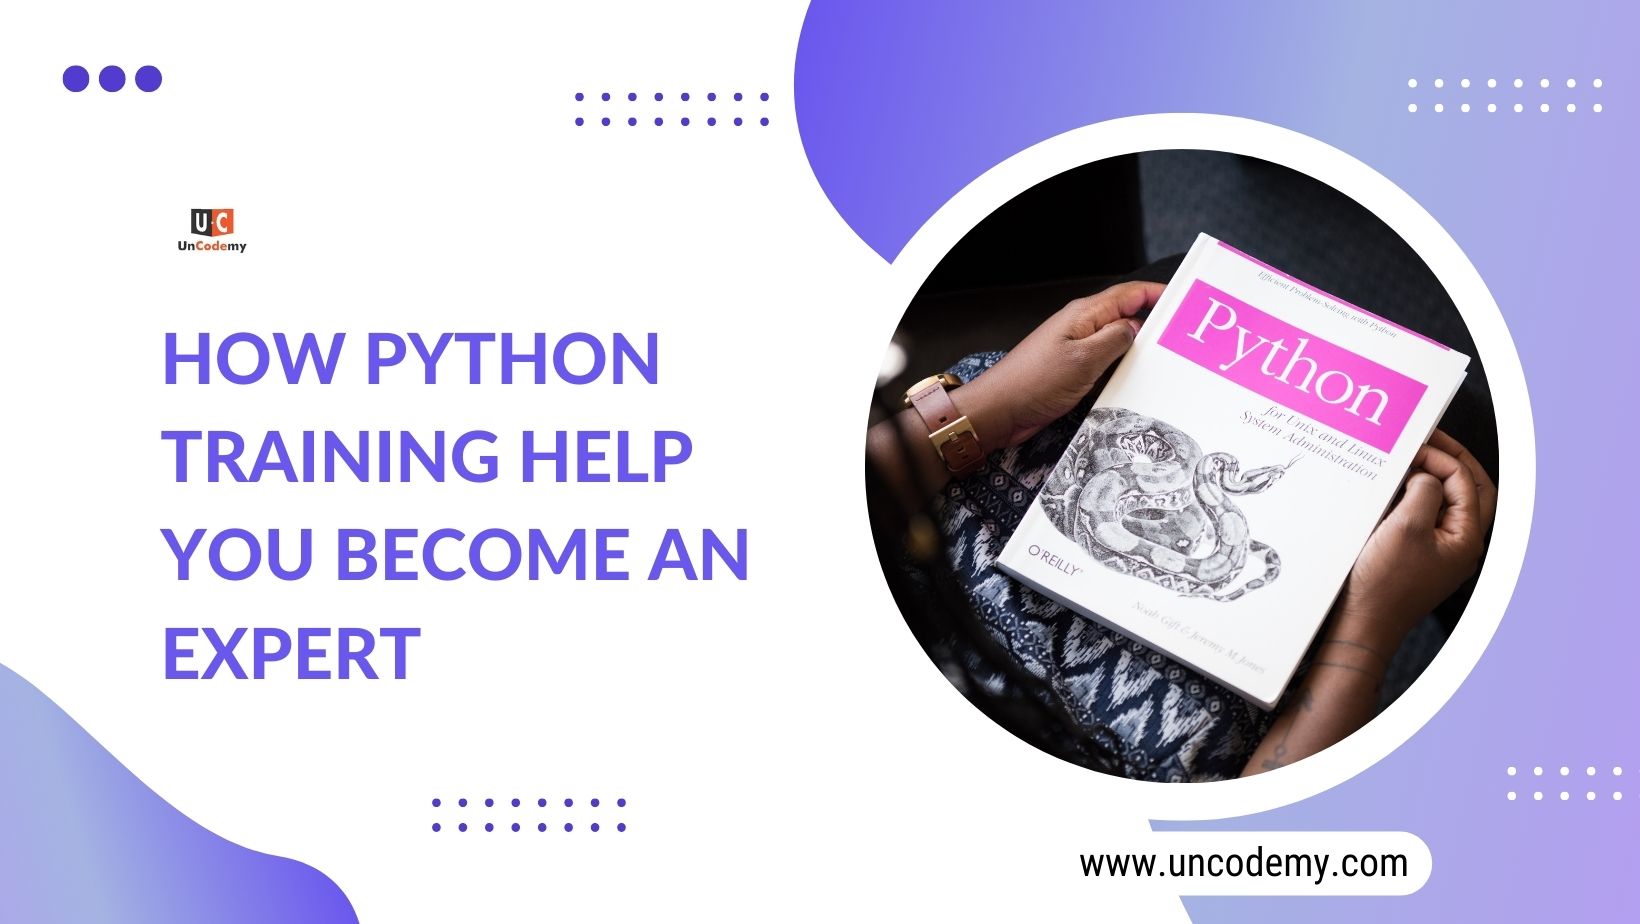 How python training help you become an expert